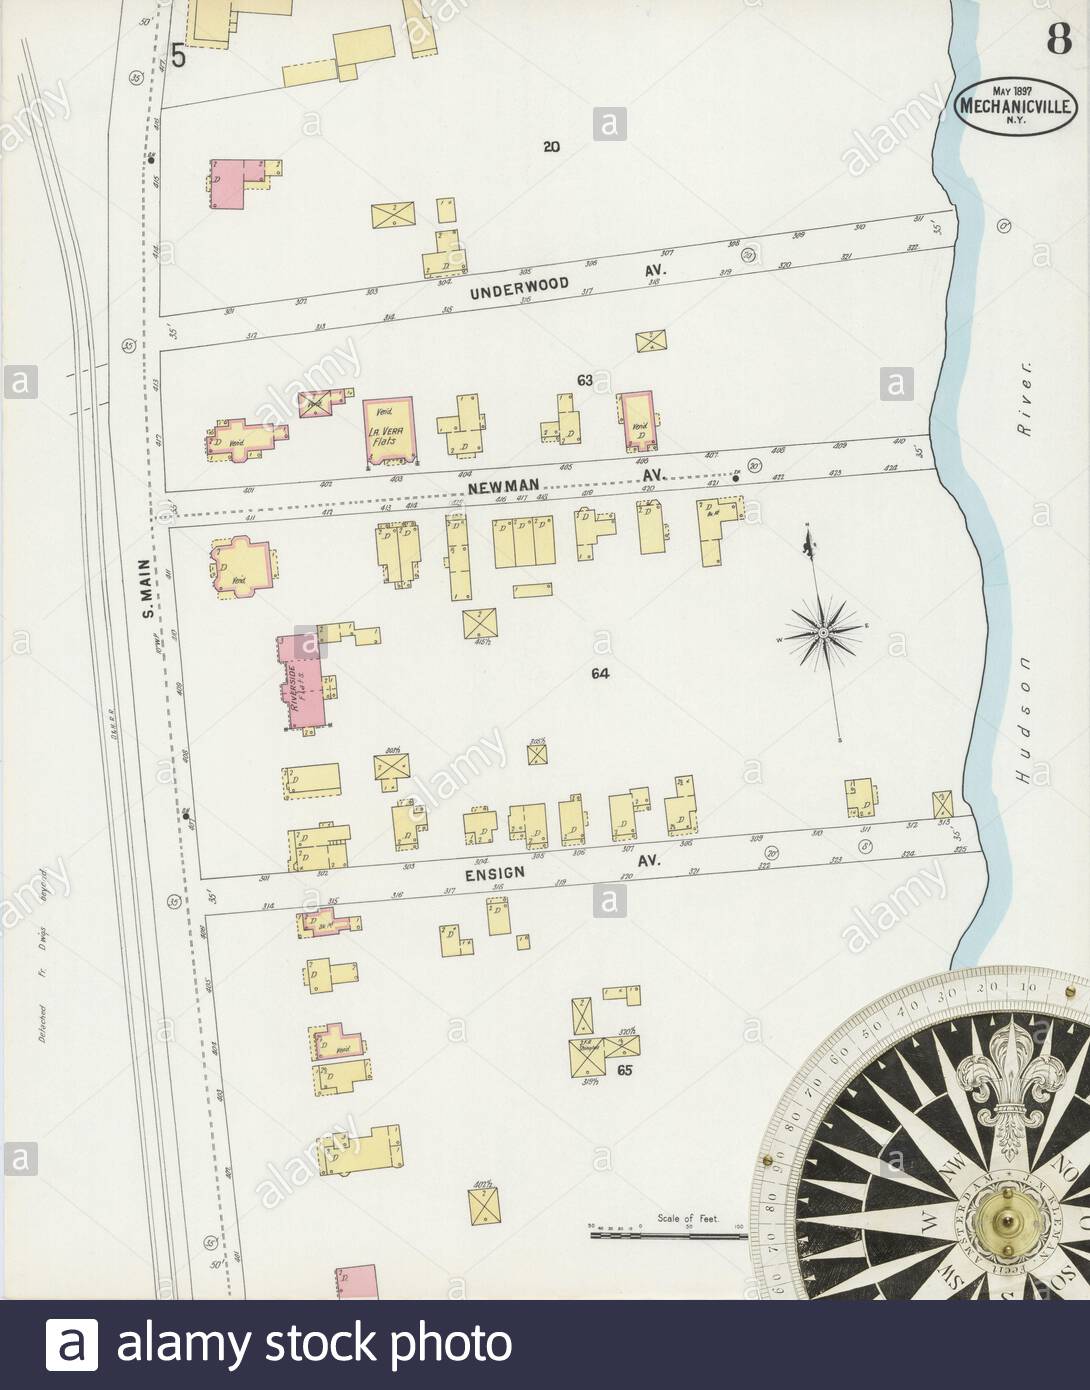 image 8 of sanborn fire insurance map from mechanicville saratoga county new york may 1897 12 sheets america street map with a nineteenth century pass 2B0P1DC